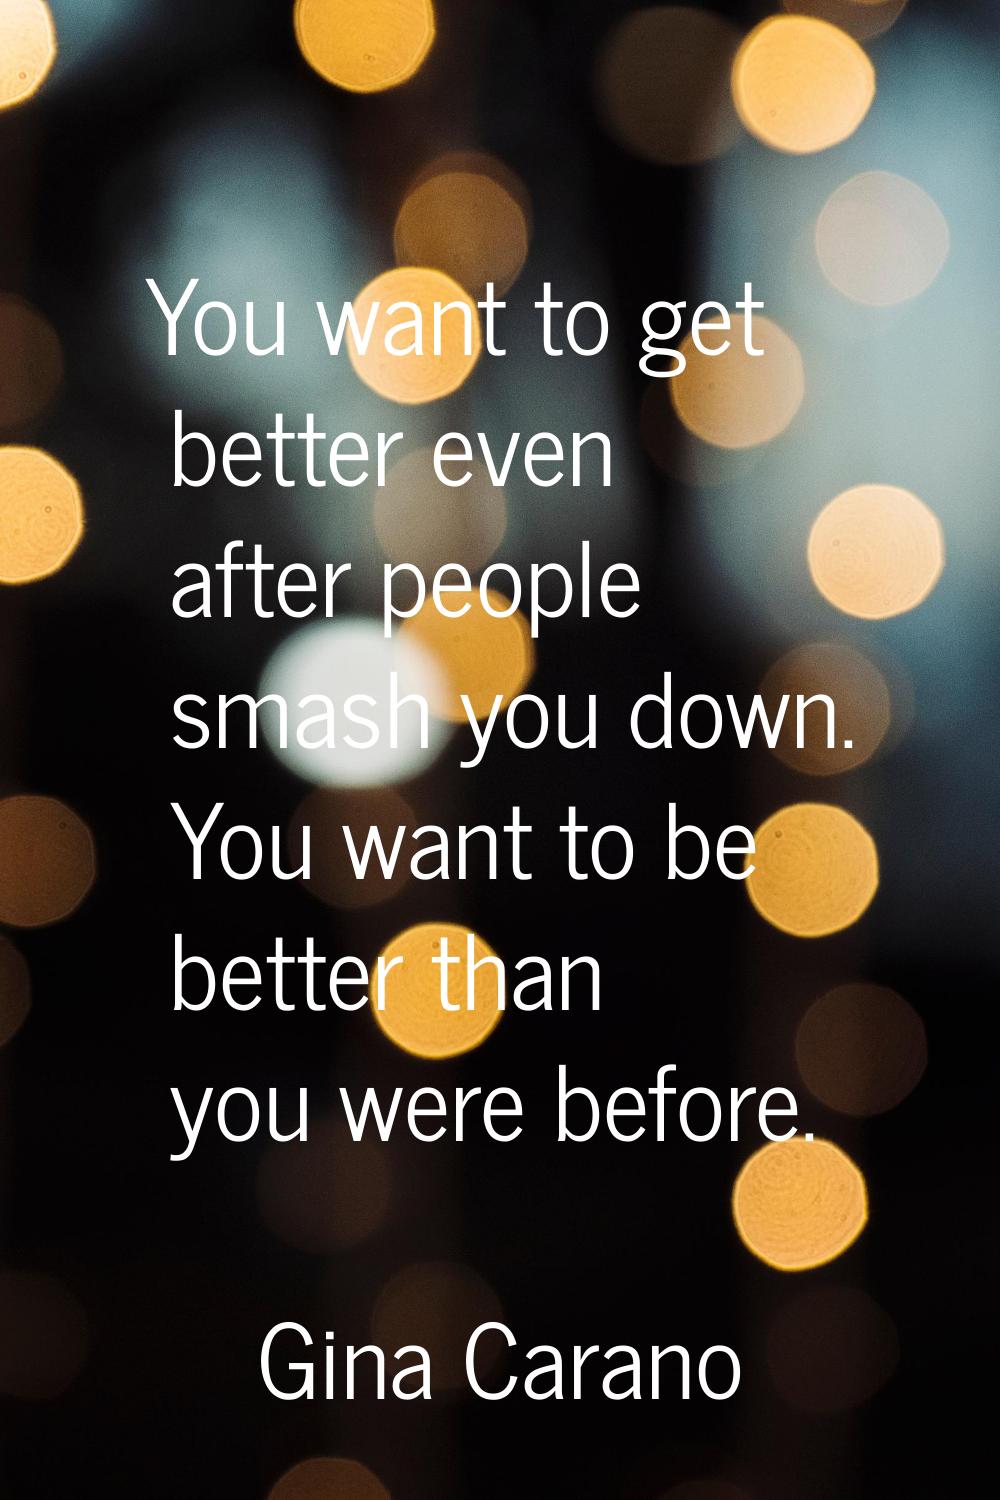 You want to get better even after people smash you down. You want to be better than you were before